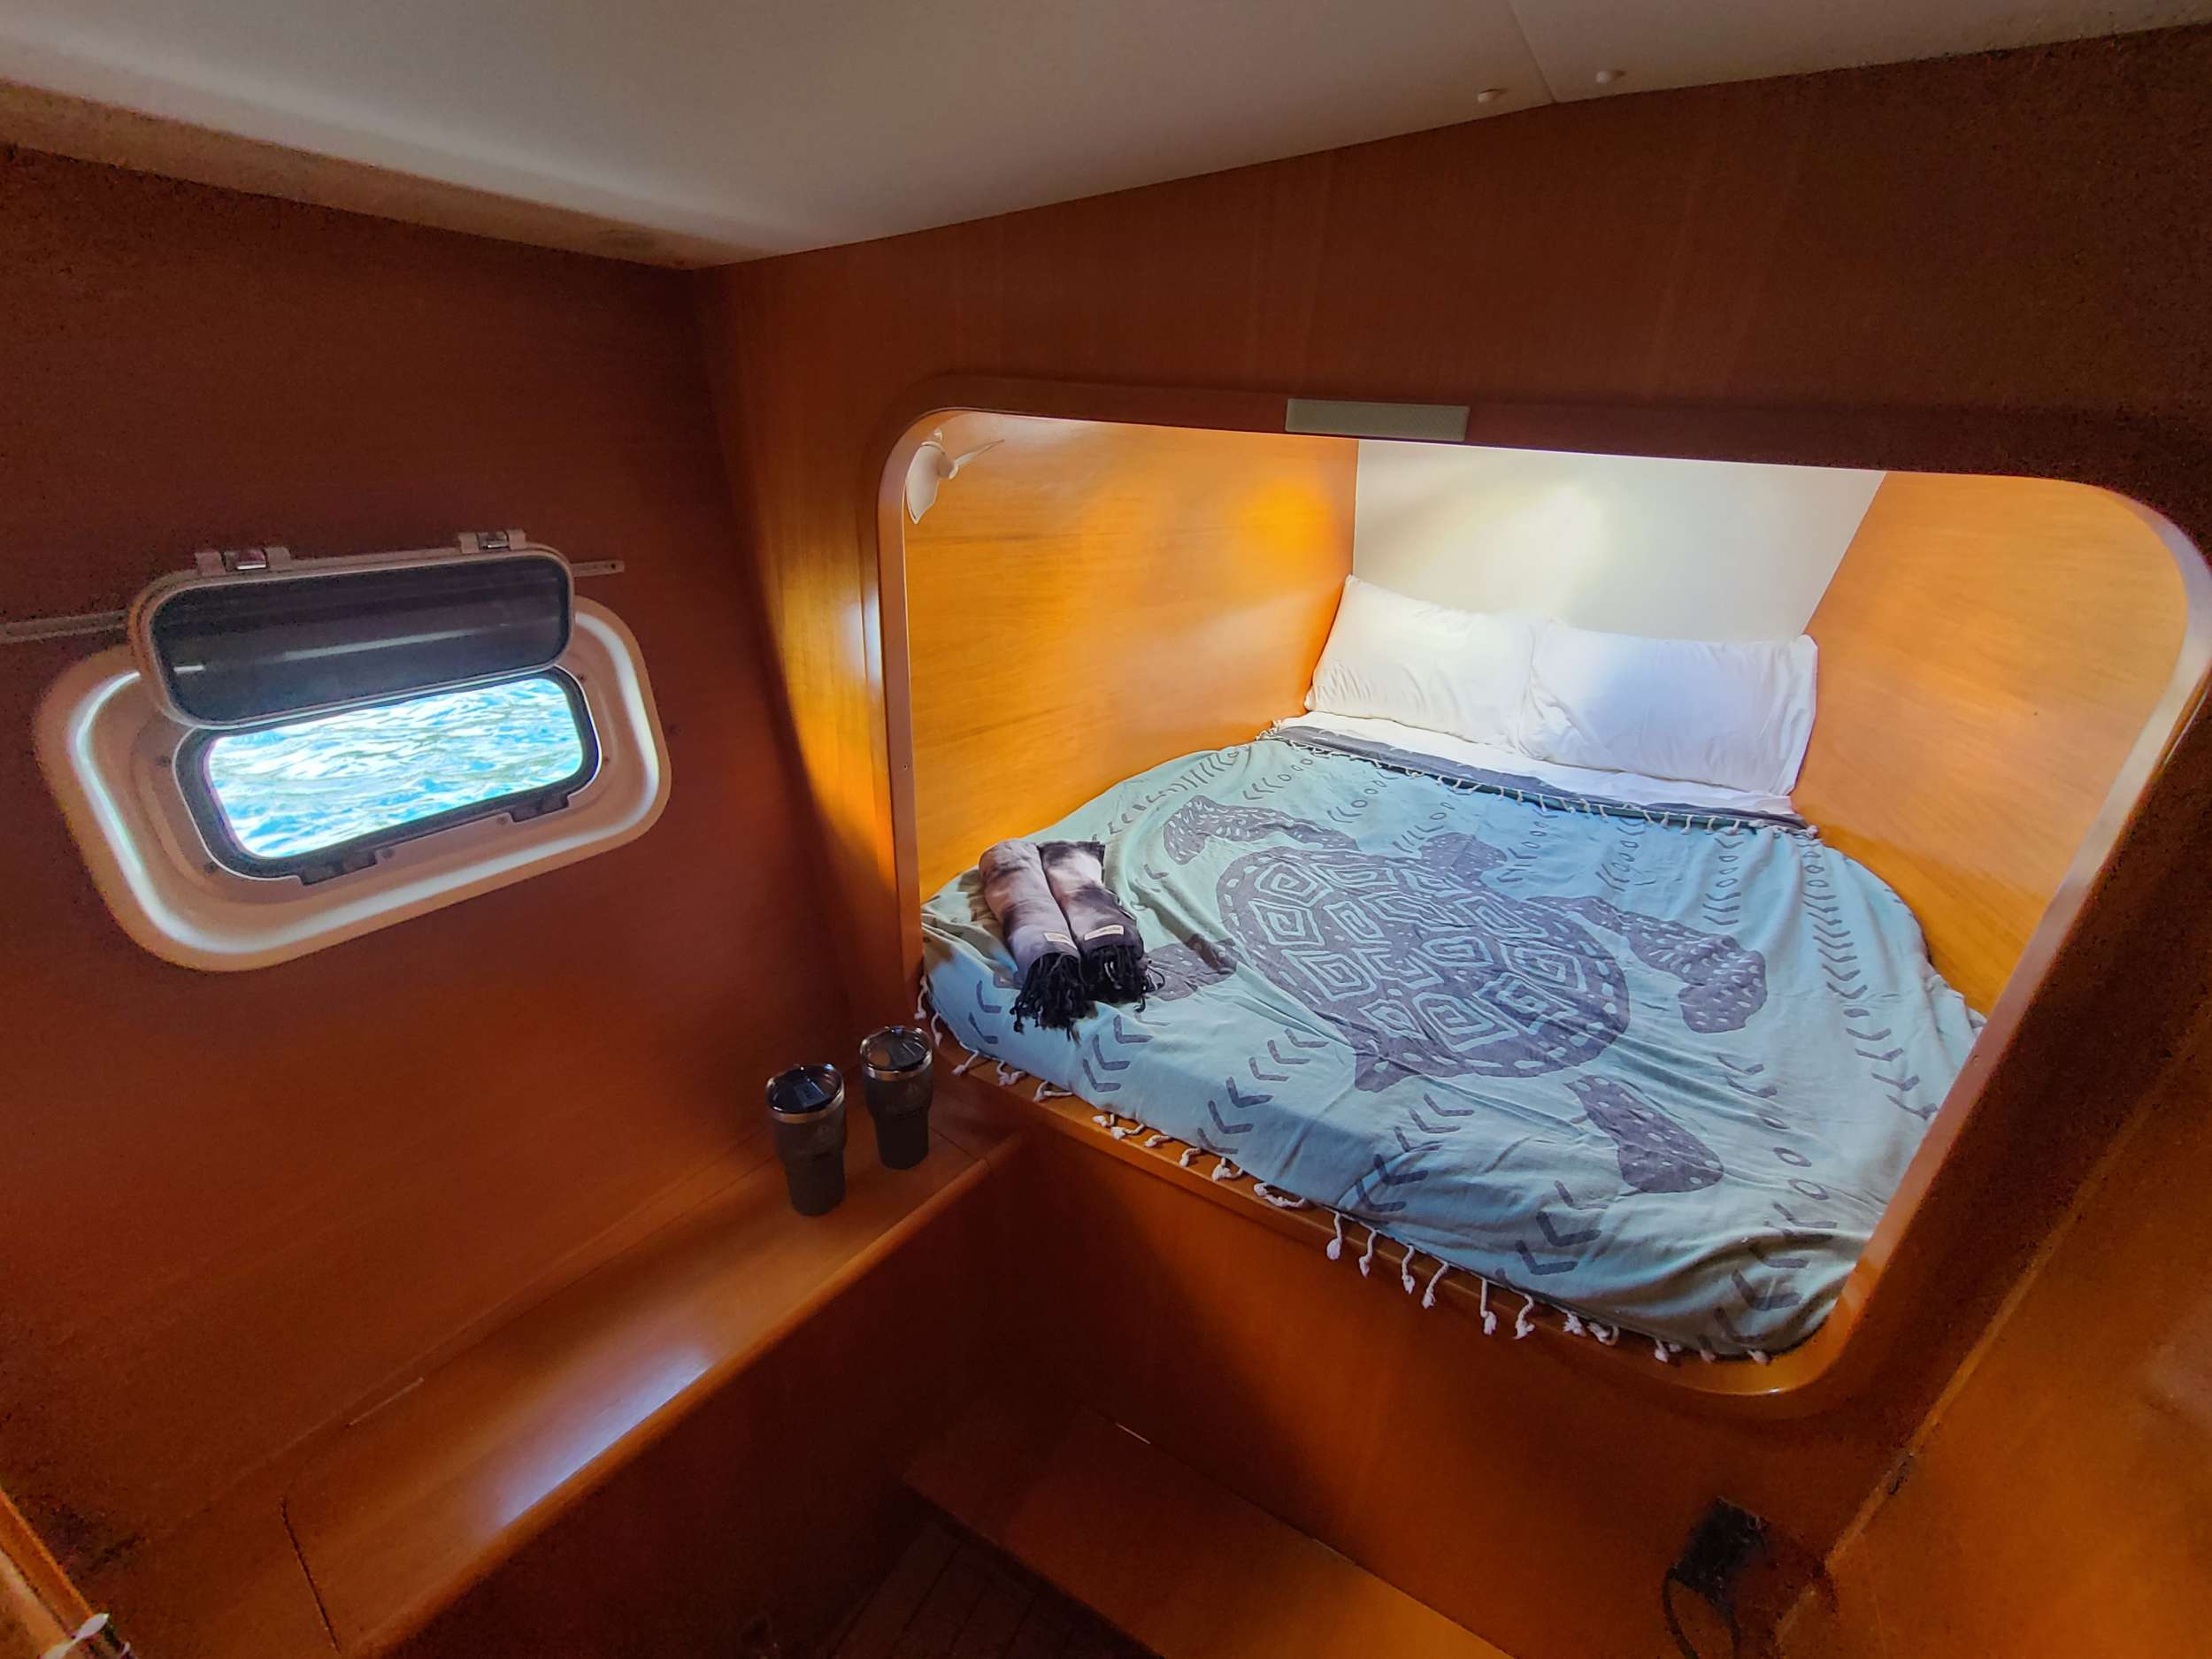 MIMBAW Yacht Charter - Port forward Stateroom Queen Bed.  All rooms have 2 fans and a hatch to catch natural ocean breezes.